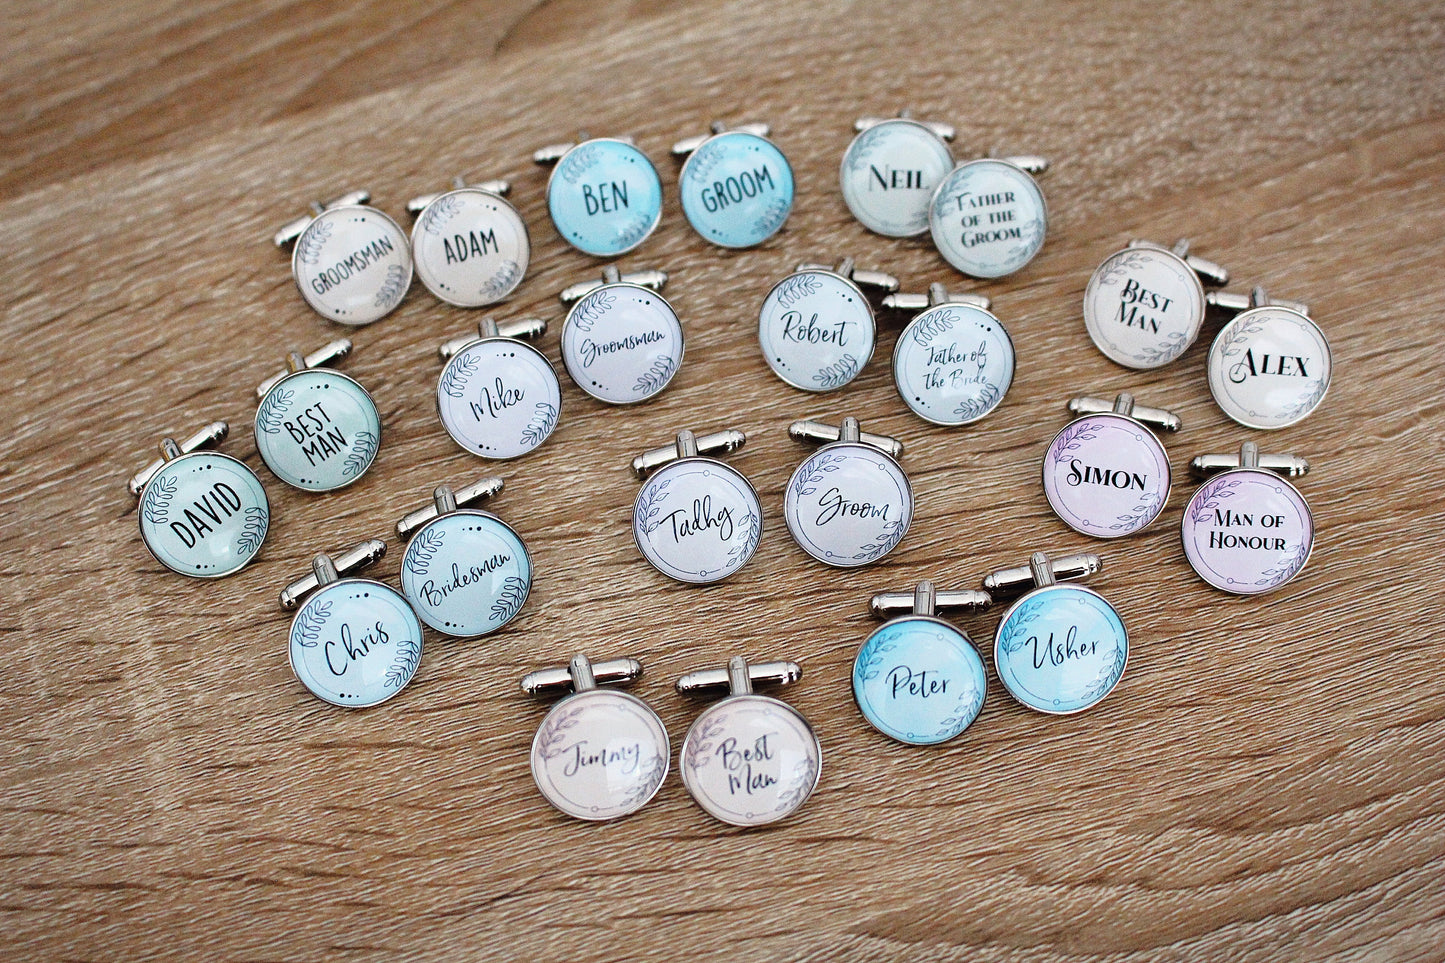 Groomsmen Personalised Cufflinks. Pastels Floral Colourful. Match colour with Groom suit. Best Man Father of the Bride. Calligraphy Names.